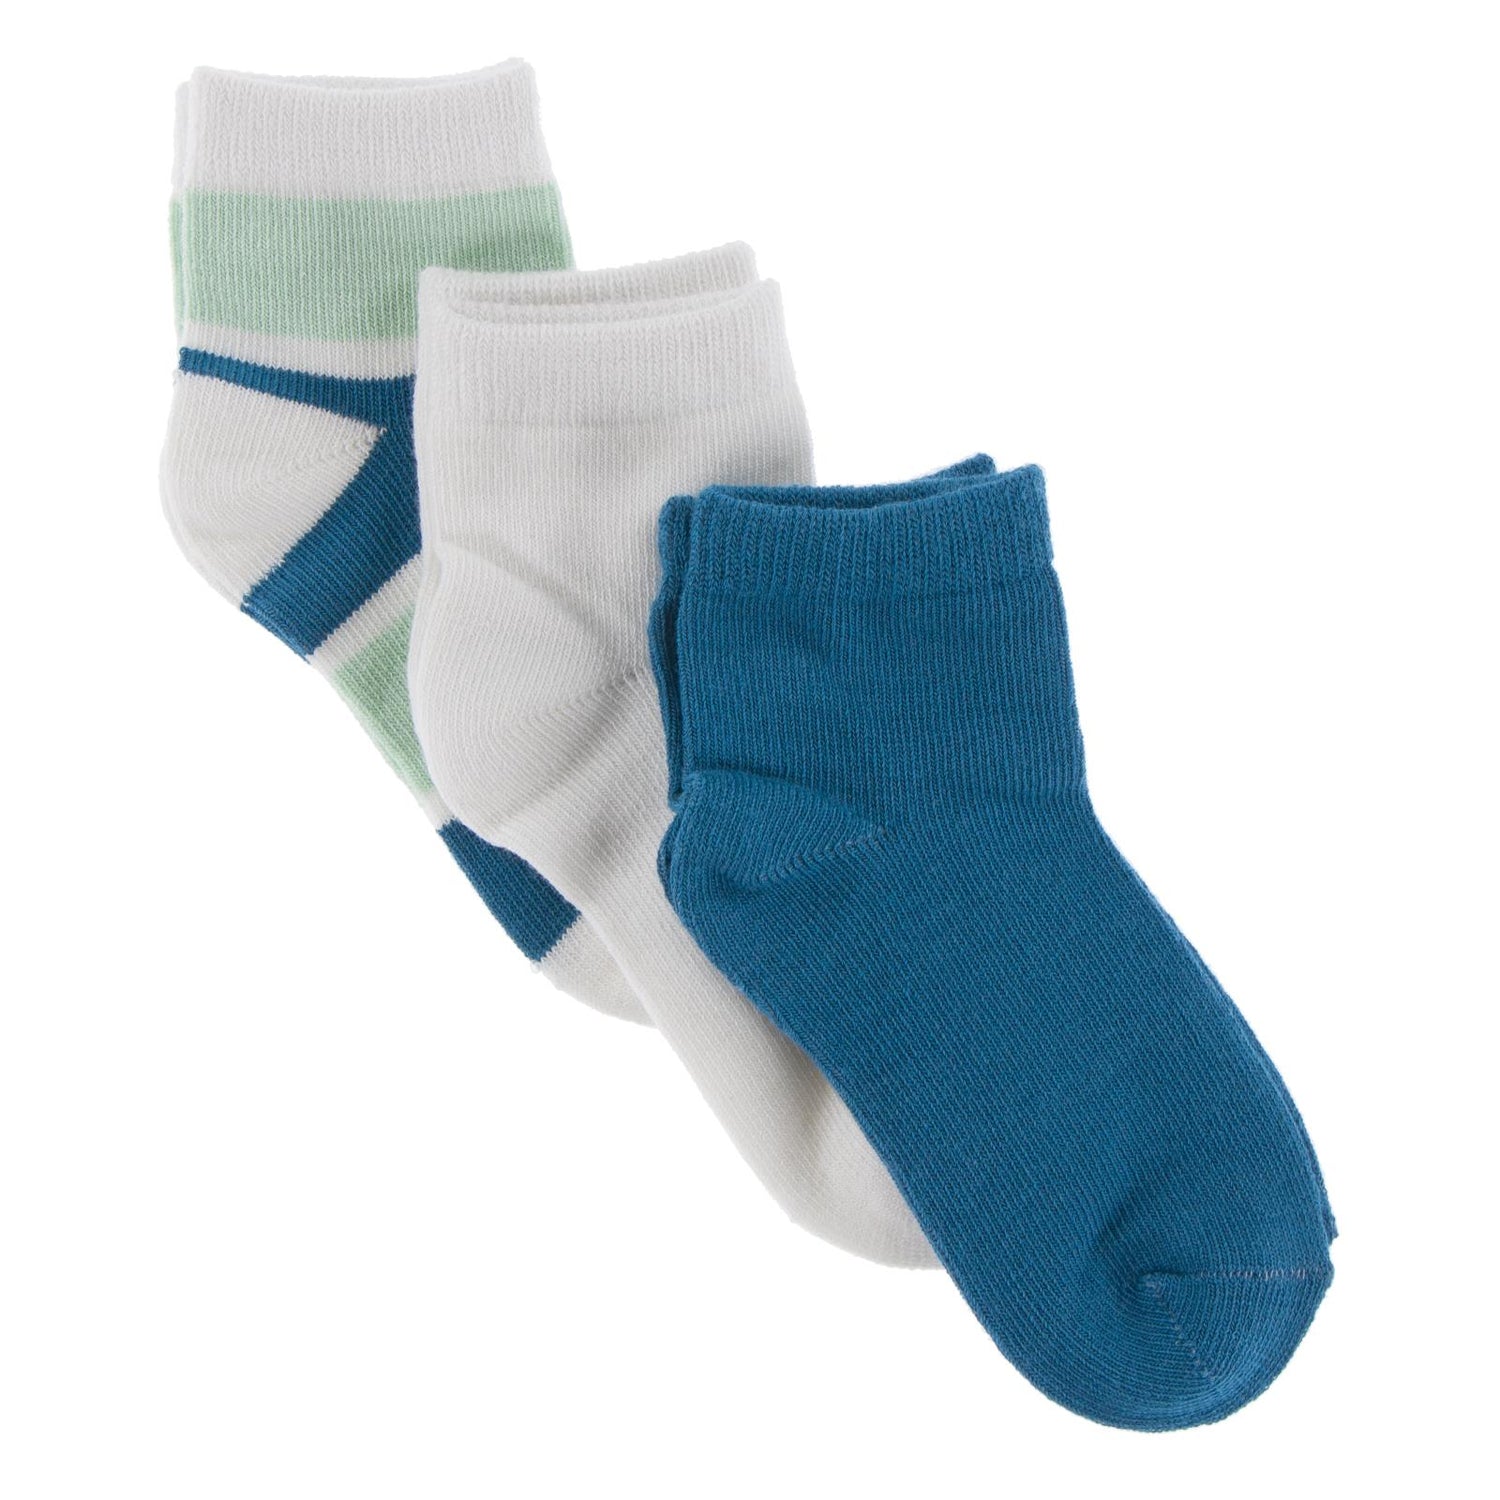 Ankle Socks Set of 3 in Natural, Seaside Cafe Stripe and Seaport